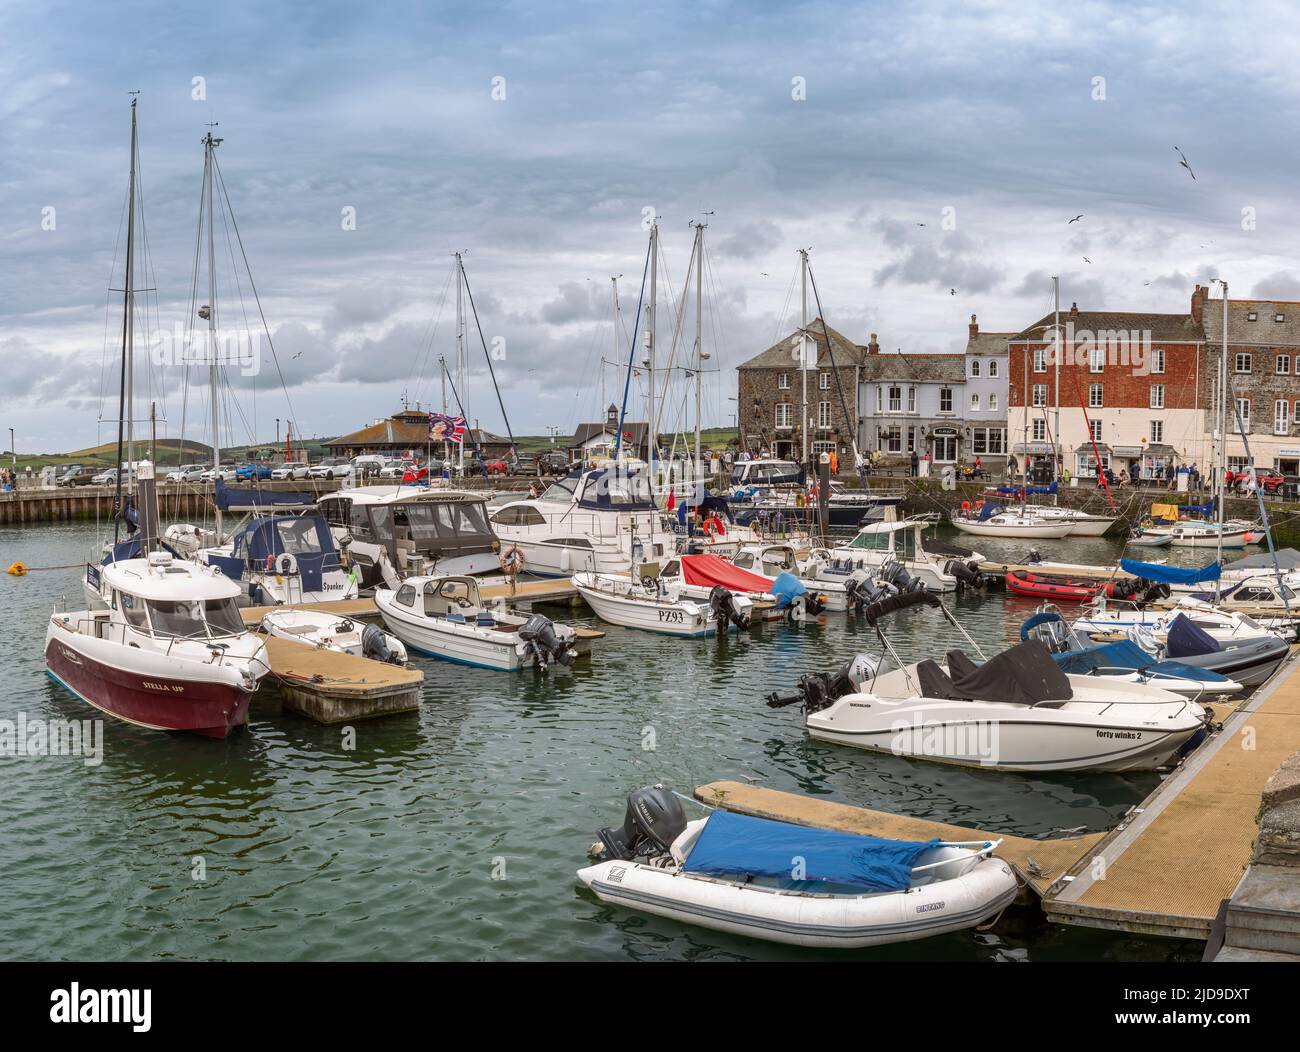 Padstow, Cornwall, England. Sunday 19th June 2022. A busy Sunday around the picturesque harbour of Padstow in Cornwall. Despite the overcast sky and ocaisional shower, visitors still flock to the popular Cornish fishing town, situated on the west bank of the River Camel estuary. Credit: Terry Mathews/Alamy Live News Stock Photo